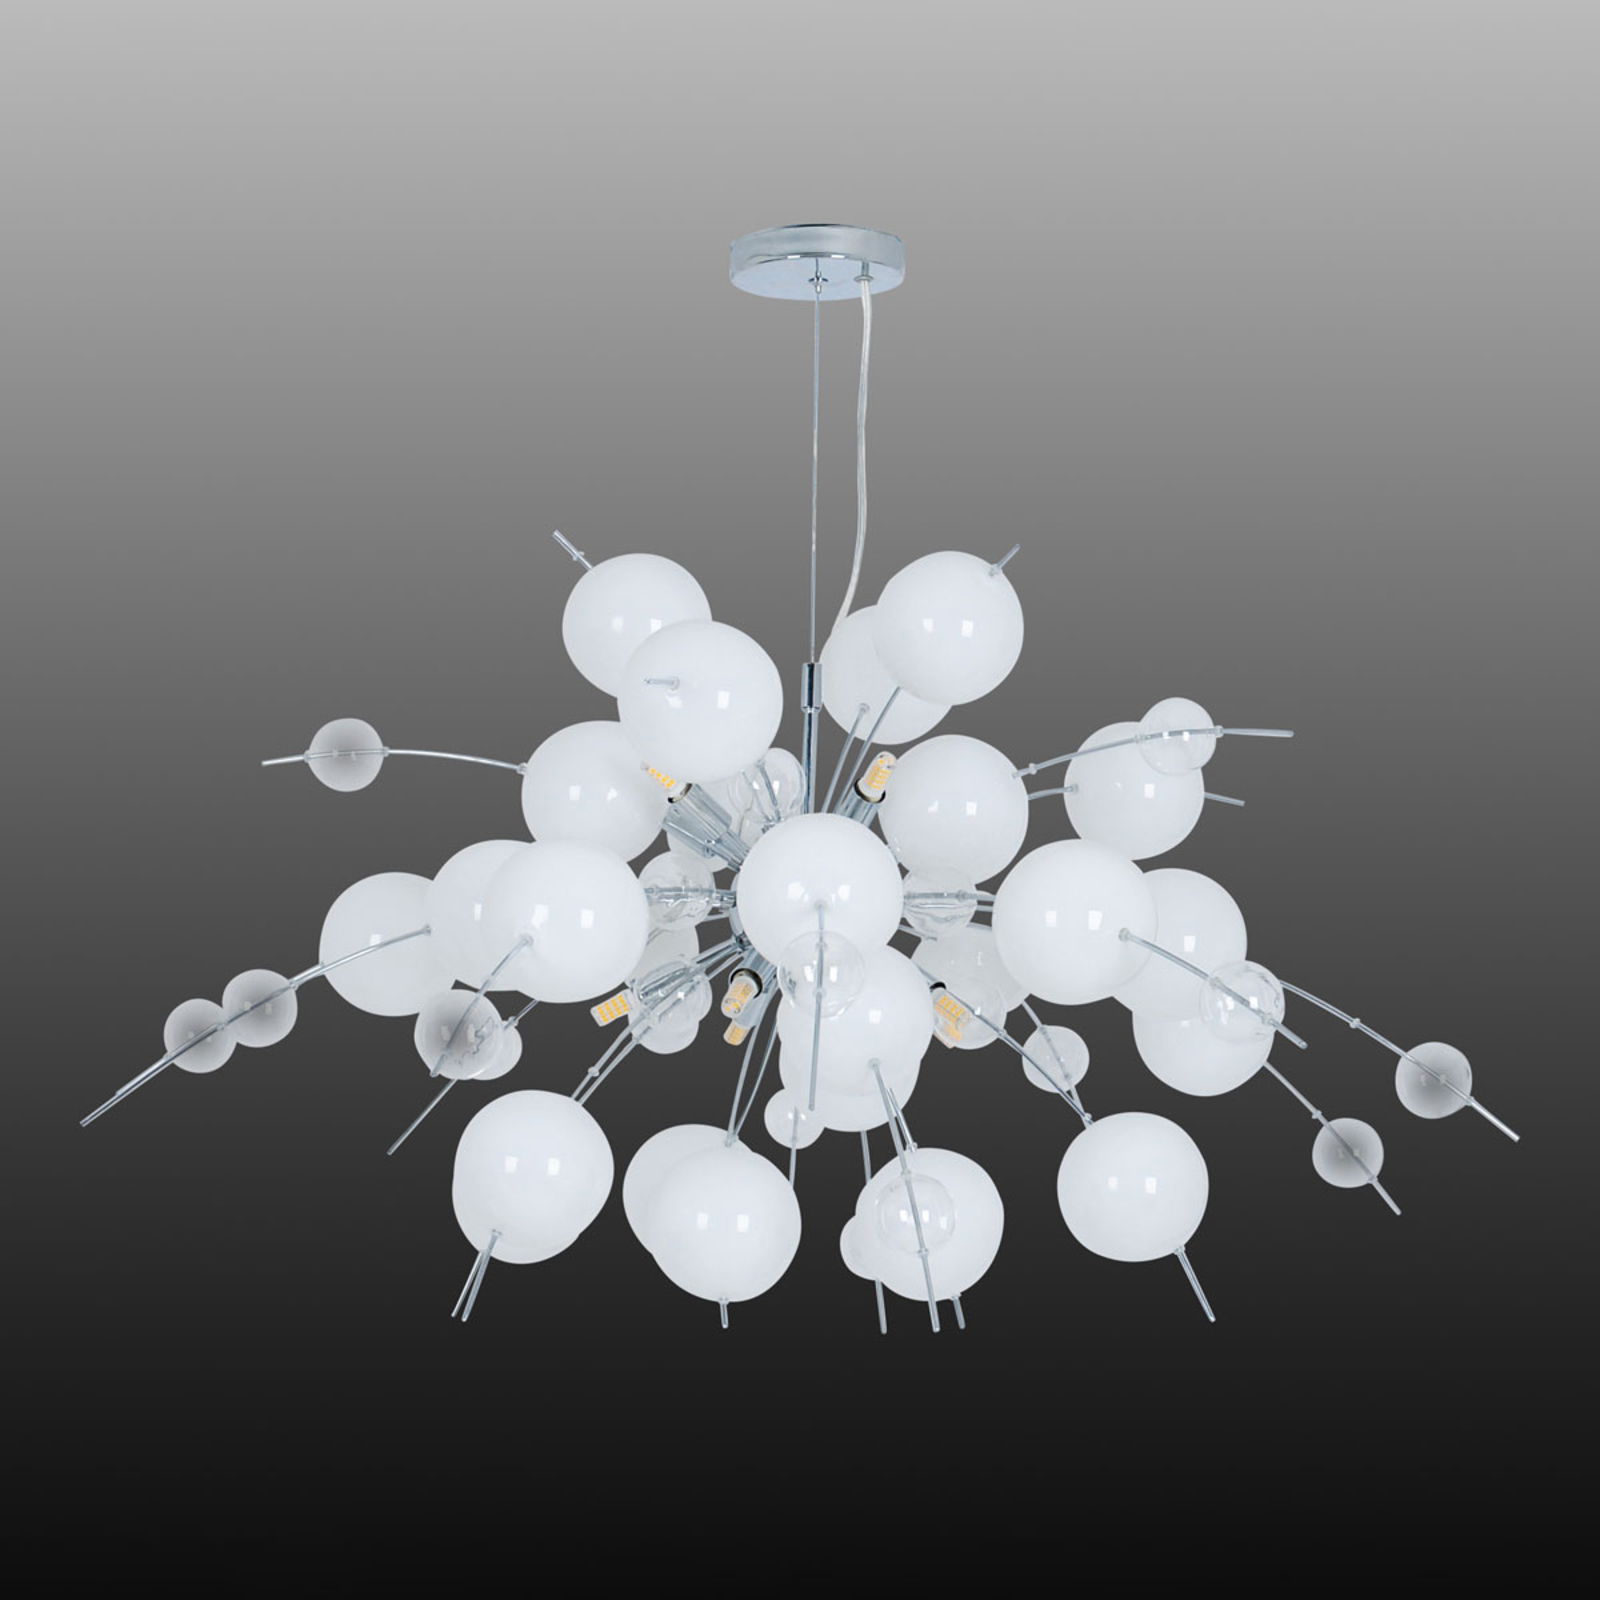 Explosion hanging light in white and chrome 98cm